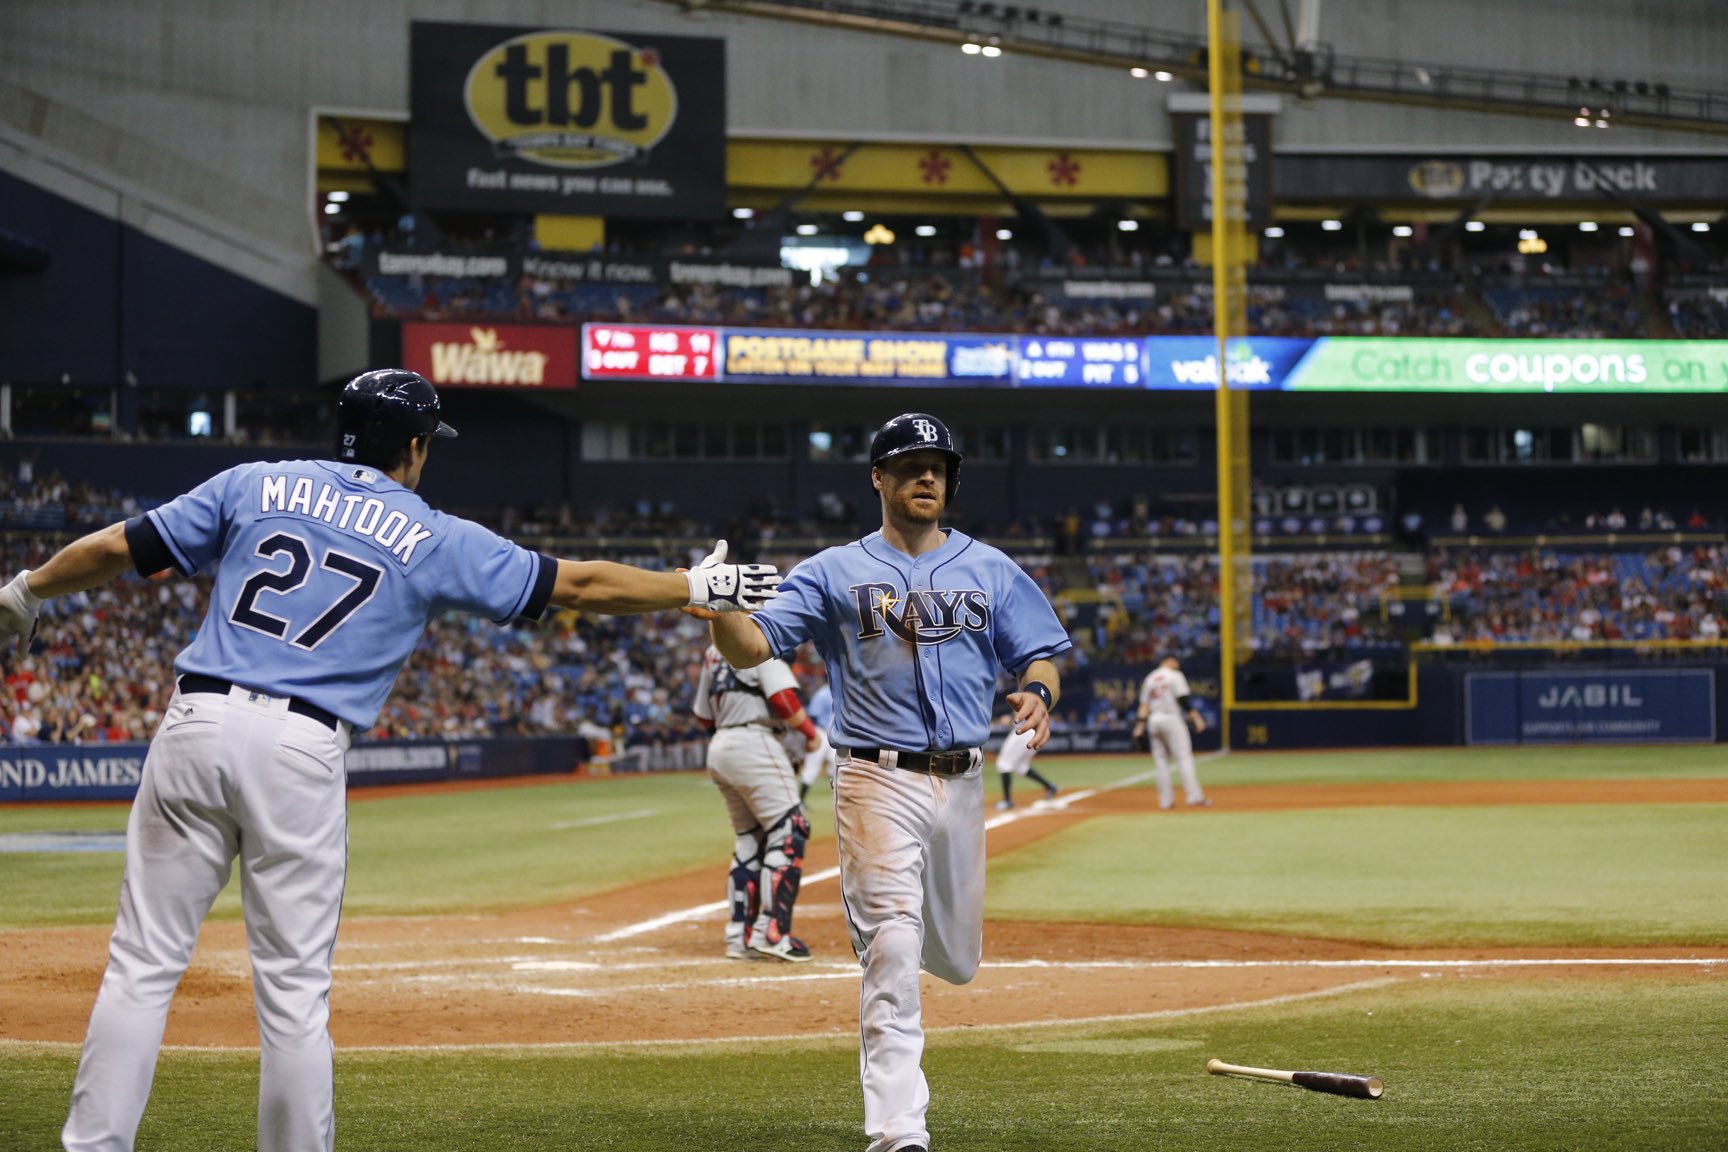 The Rays tied the game in the eighth, yet lost in the 10th of Sunday's home season finale against the Red Sox. (Photo Credit: Tampa Bay Rays)